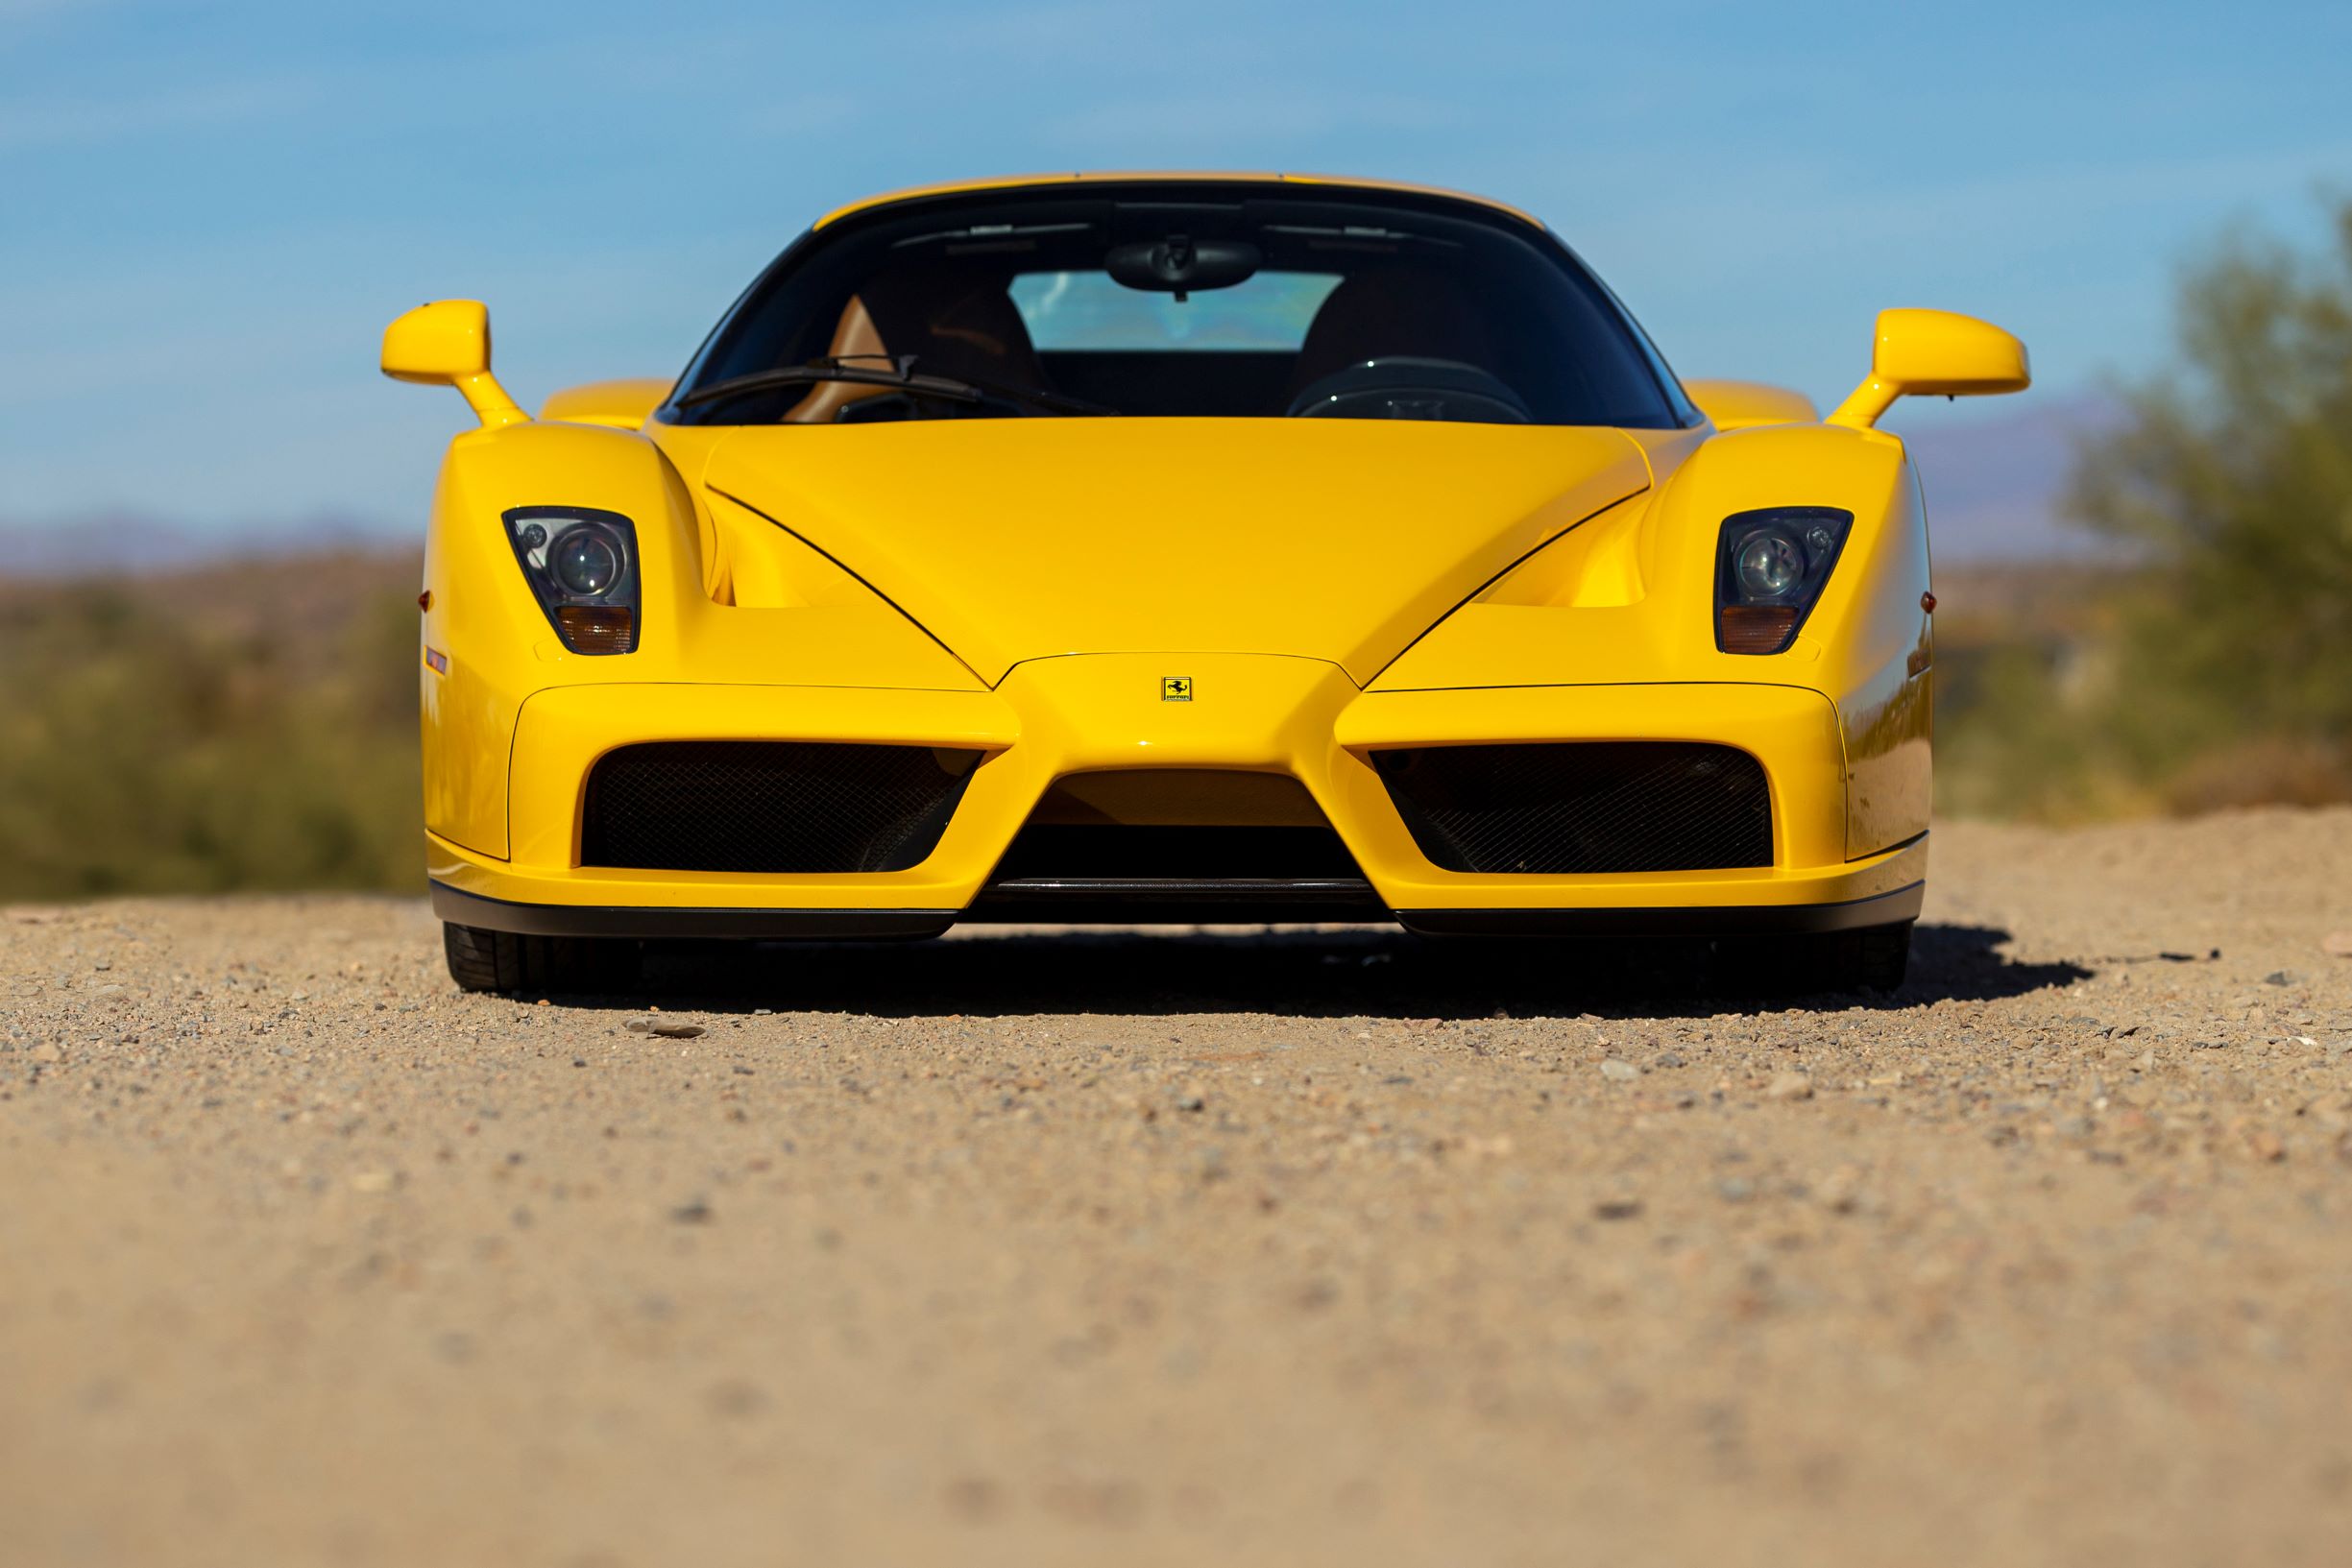 This Famous Yellow Ferrari Enzo Is Now Up for Grabs - Maxim